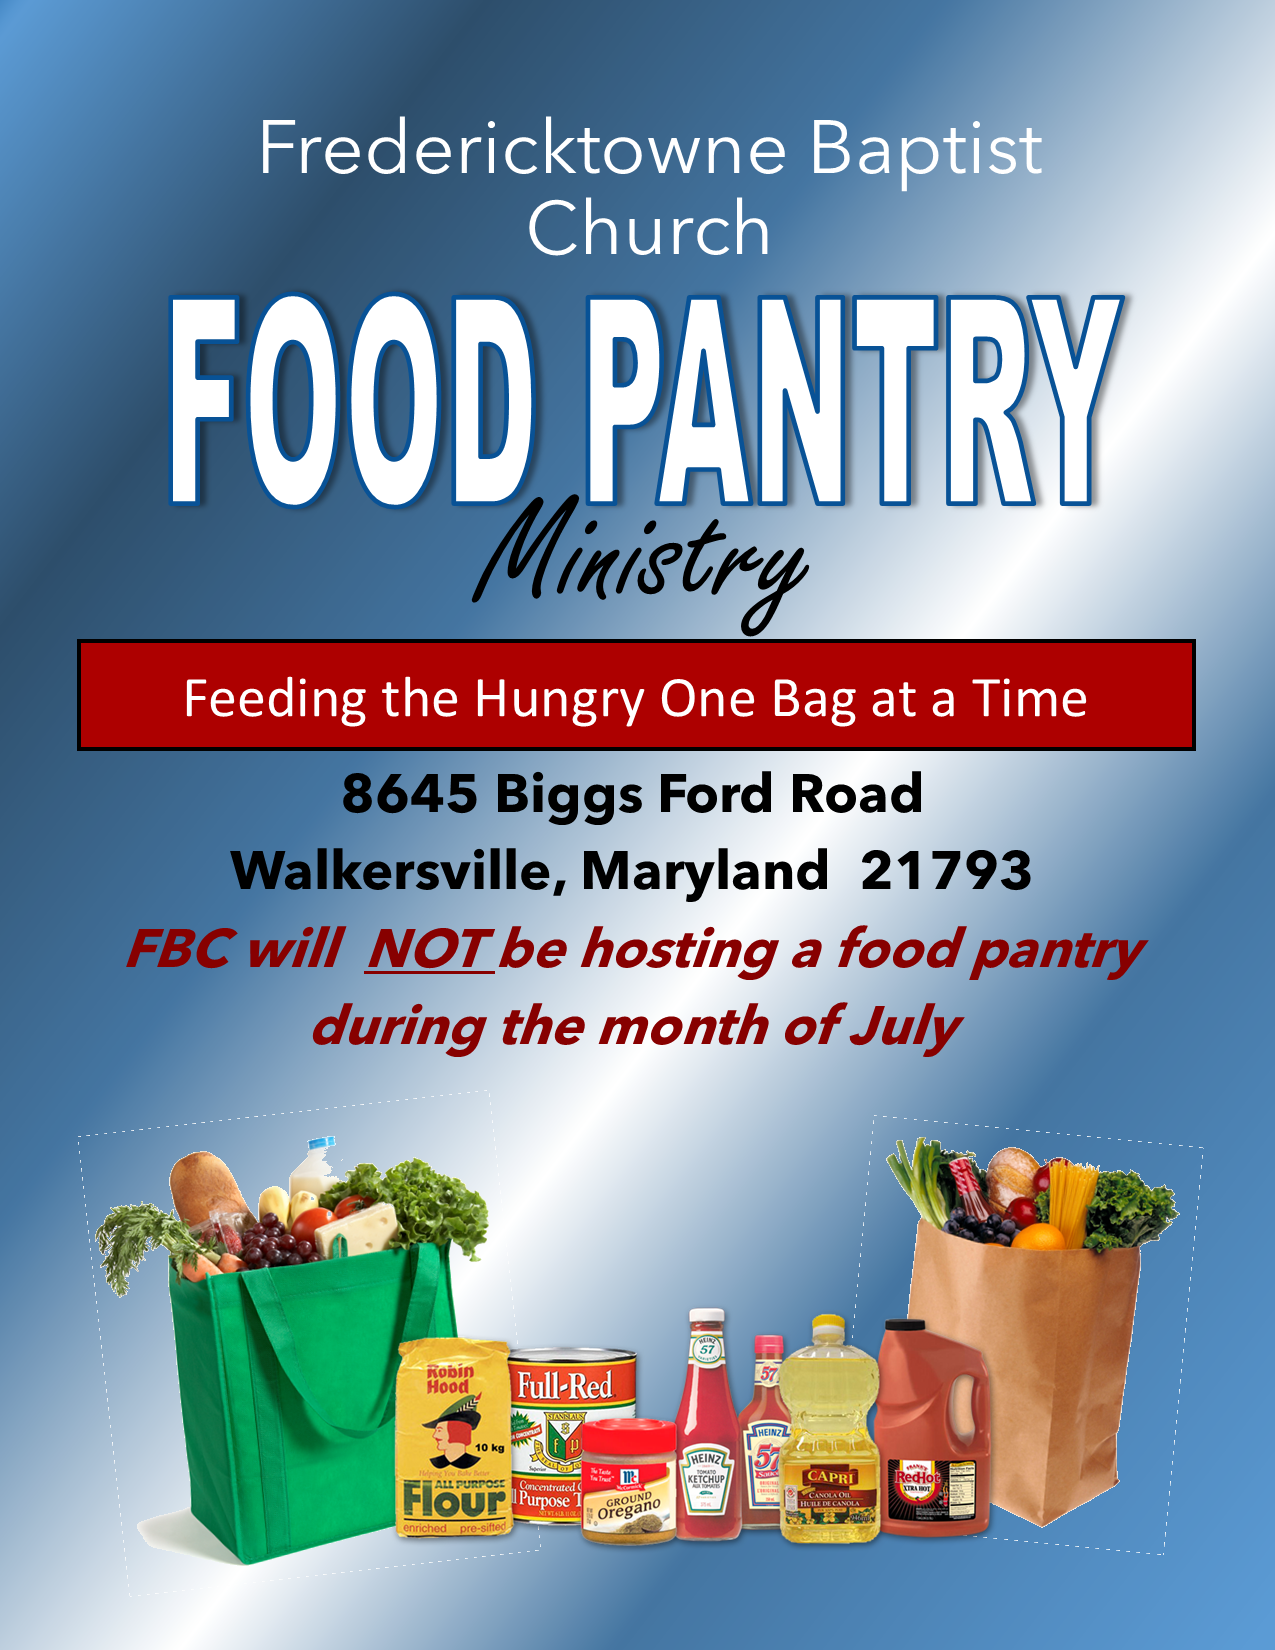 drive-by-food-pantry-fredericktowne-baptist-church